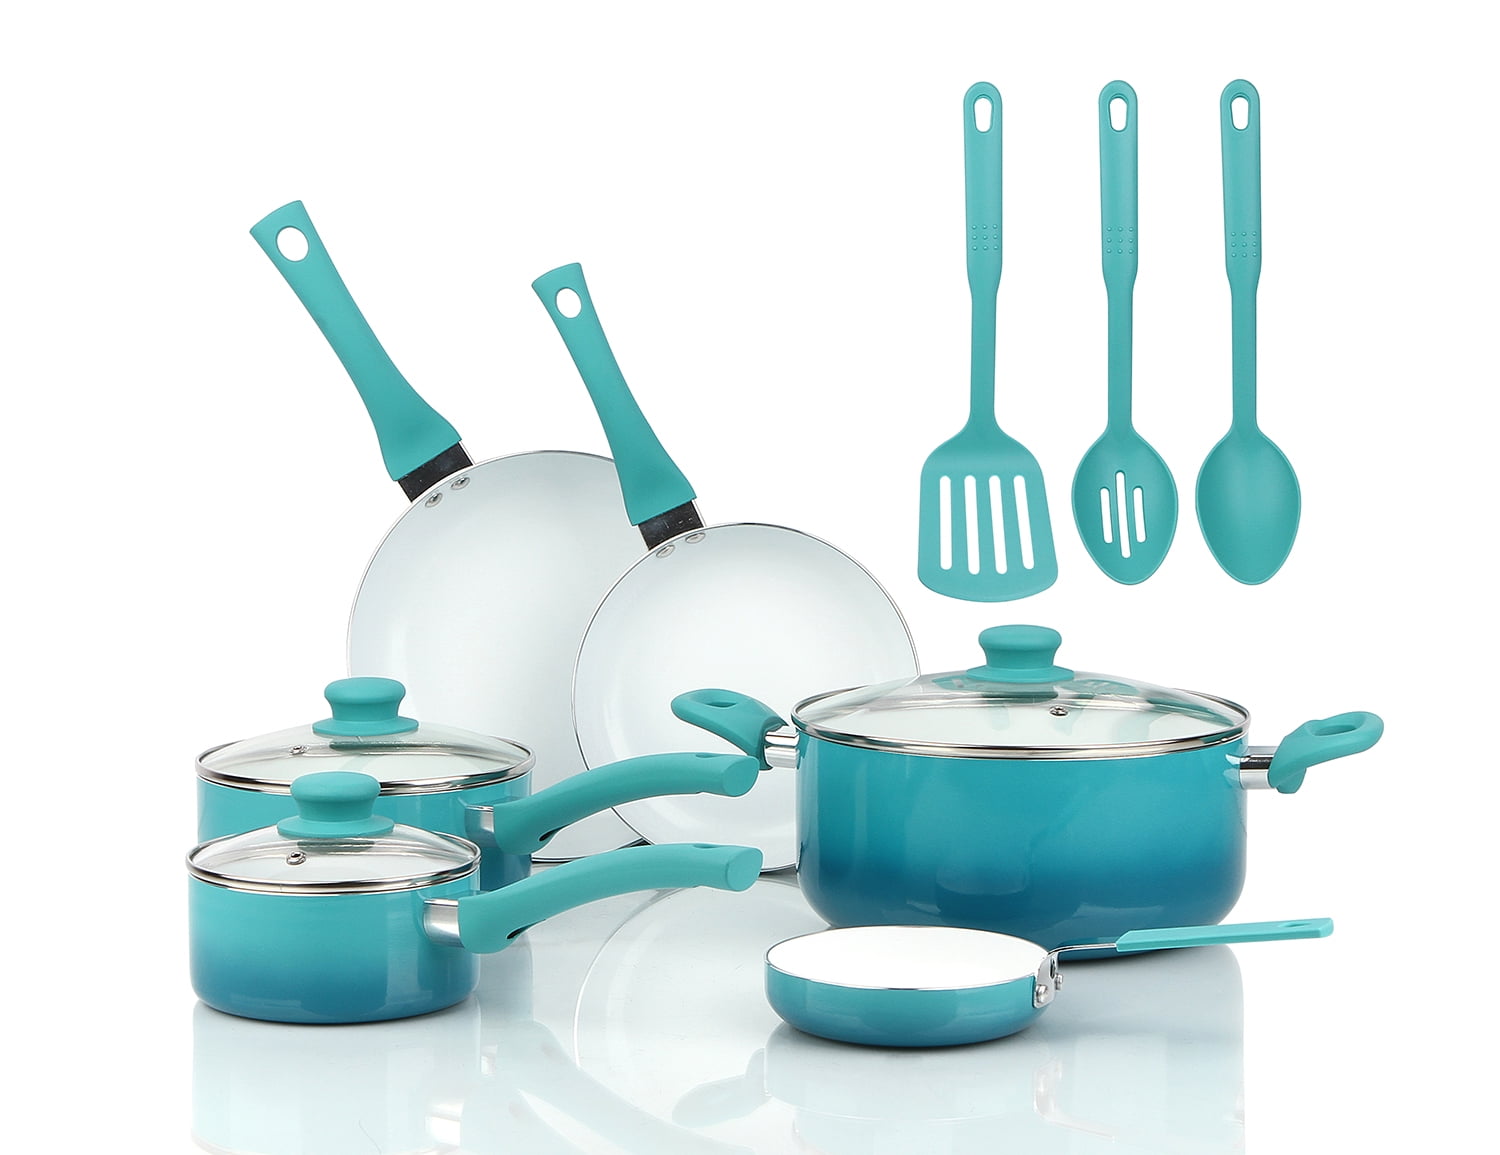  M MELENTA Pots and Pans Set Nonstick, 11pcs Kitchen Cookware  Sets Induction Cookware, Ceramic Non Stick Cooking Set, Stay Cool Handle &  Bamboo Kitchen Utensils, 100% PFOA Free, Turquoise: Home 